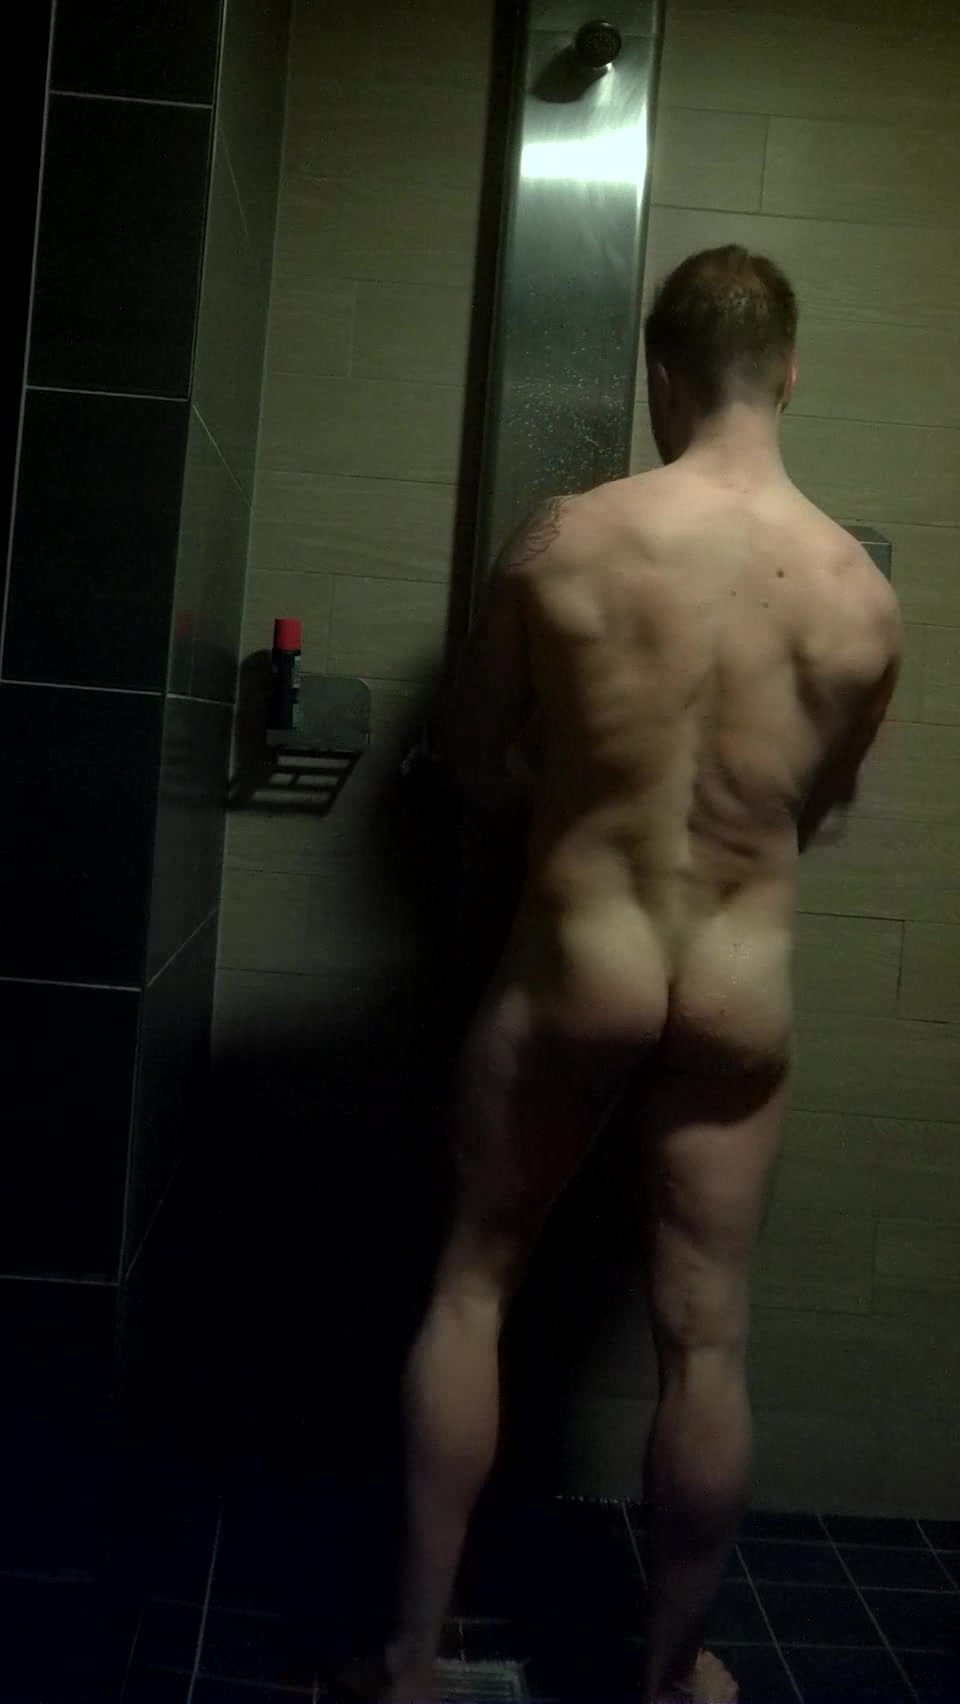 Caught in the gym shower